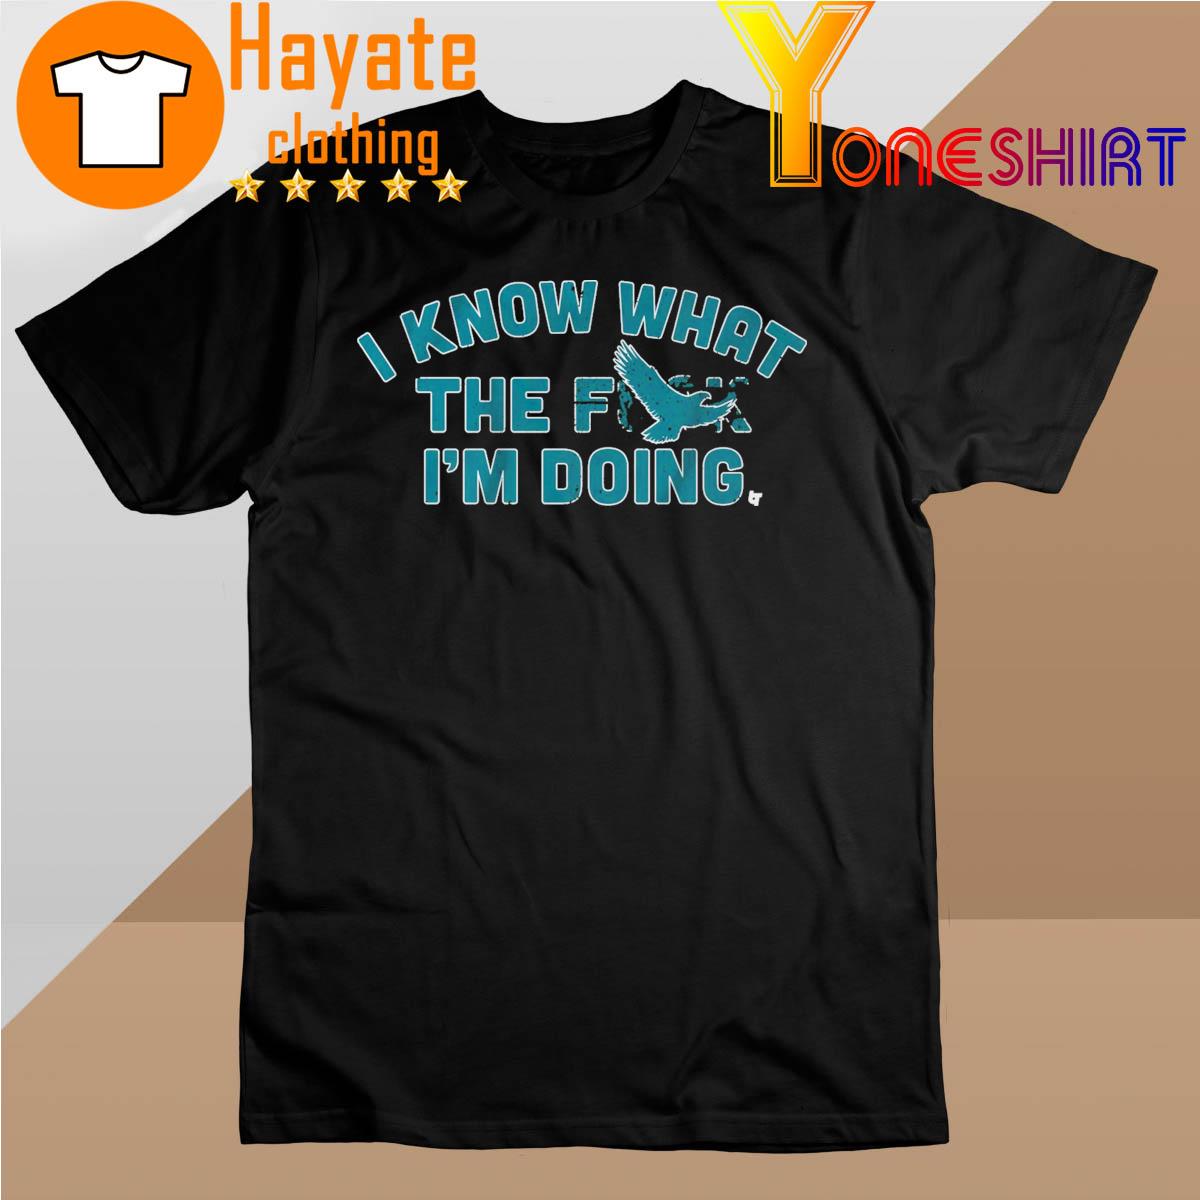 I know what the F i'm doing shirt